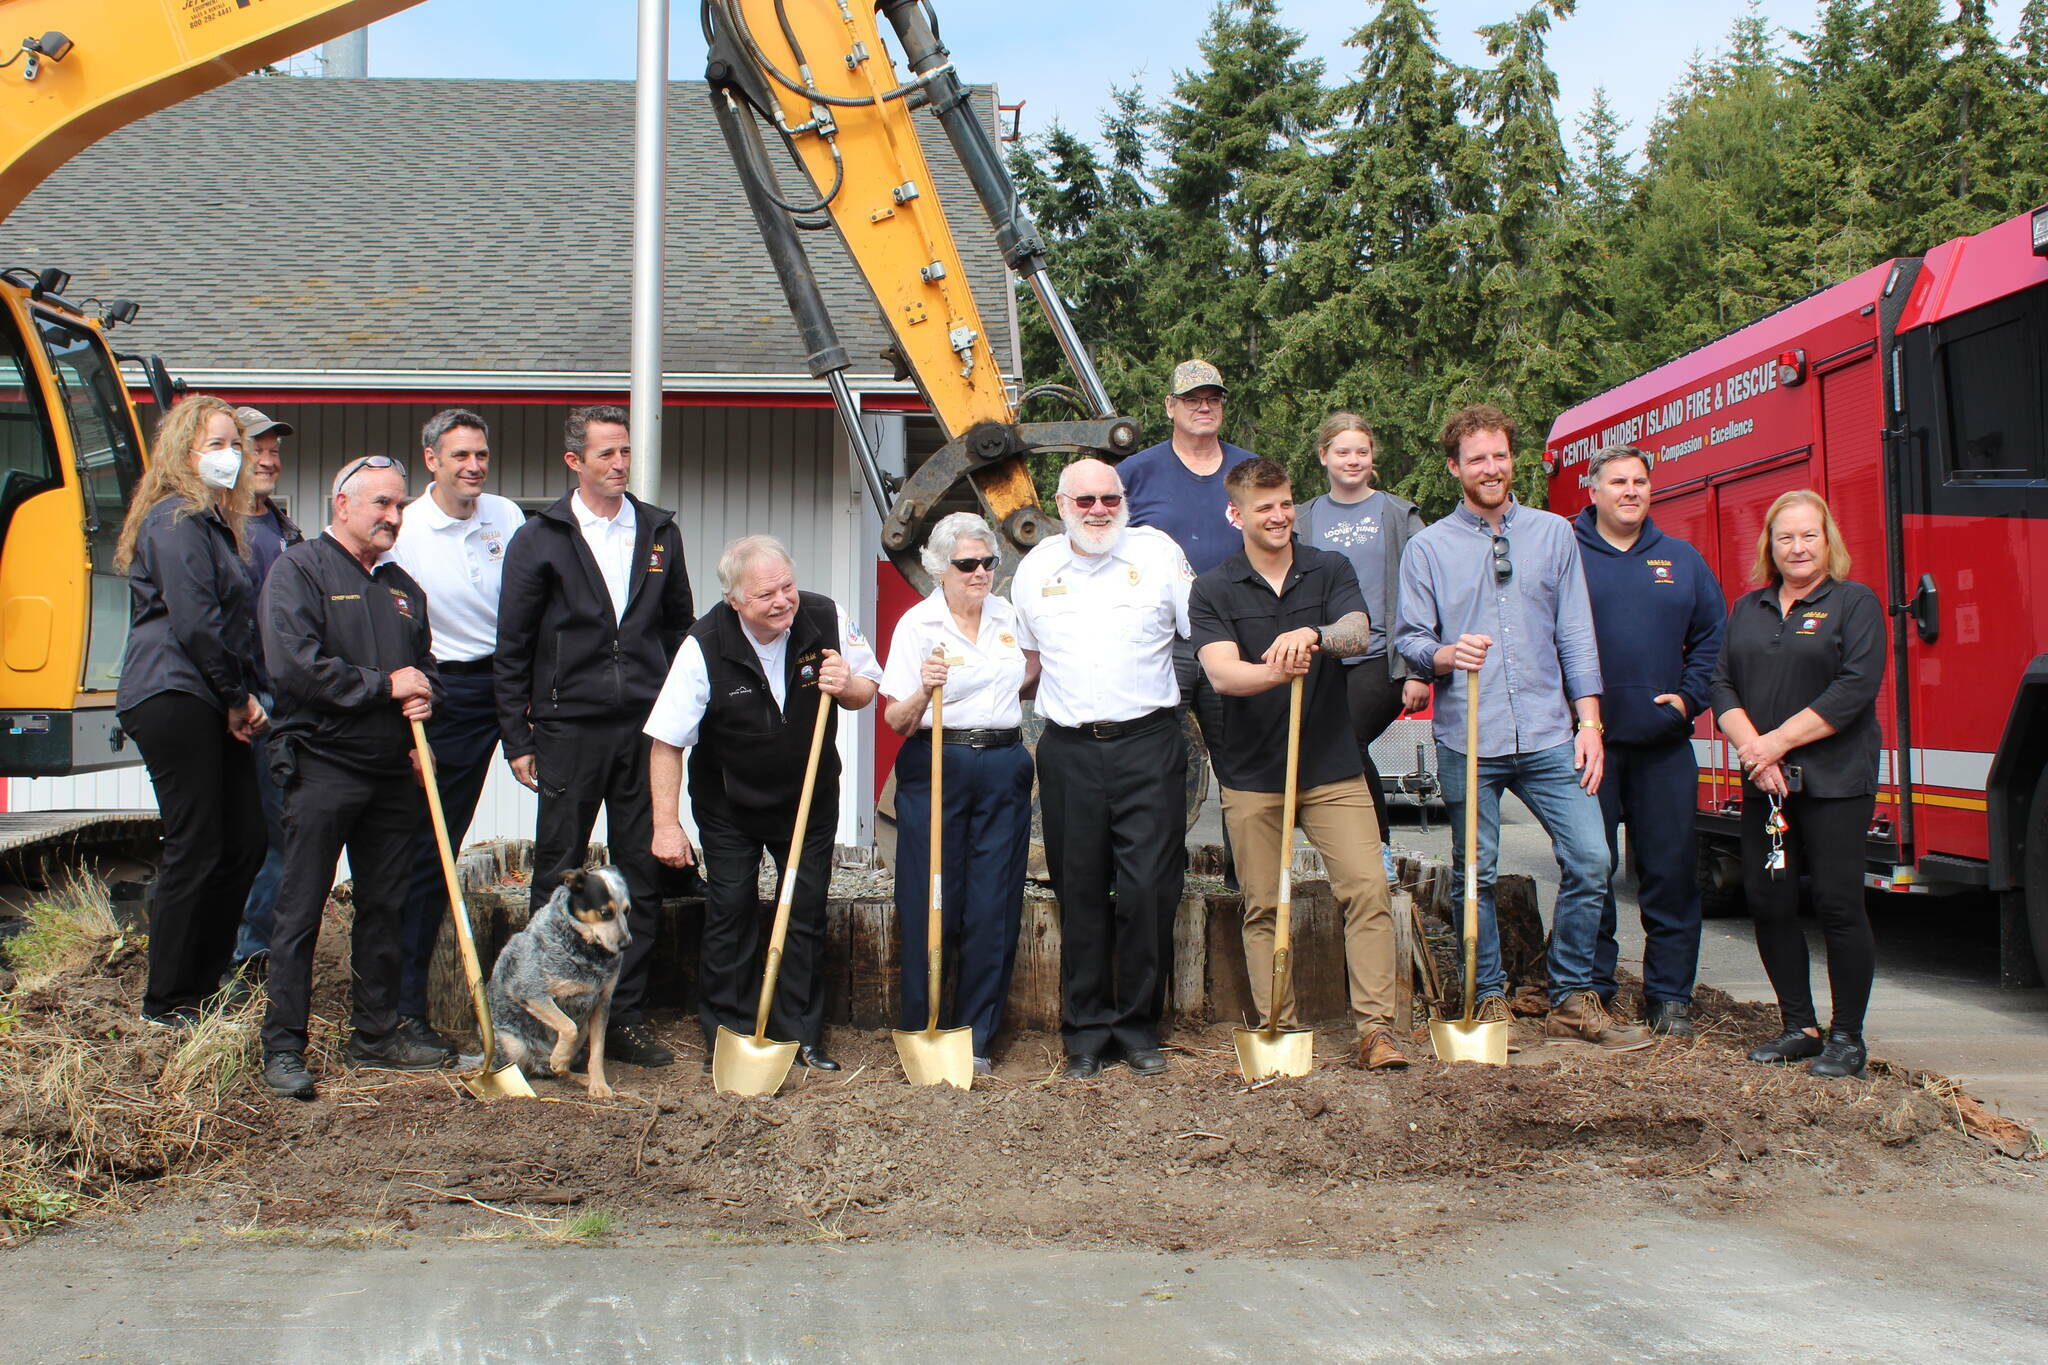 Stakeholders participate in a groundbreaking at the site of the new Central Whidbey Island Fire and Rescue station in Coupeville in September 2022. (File photo by Karina Andrew/Whidbey News-Times)